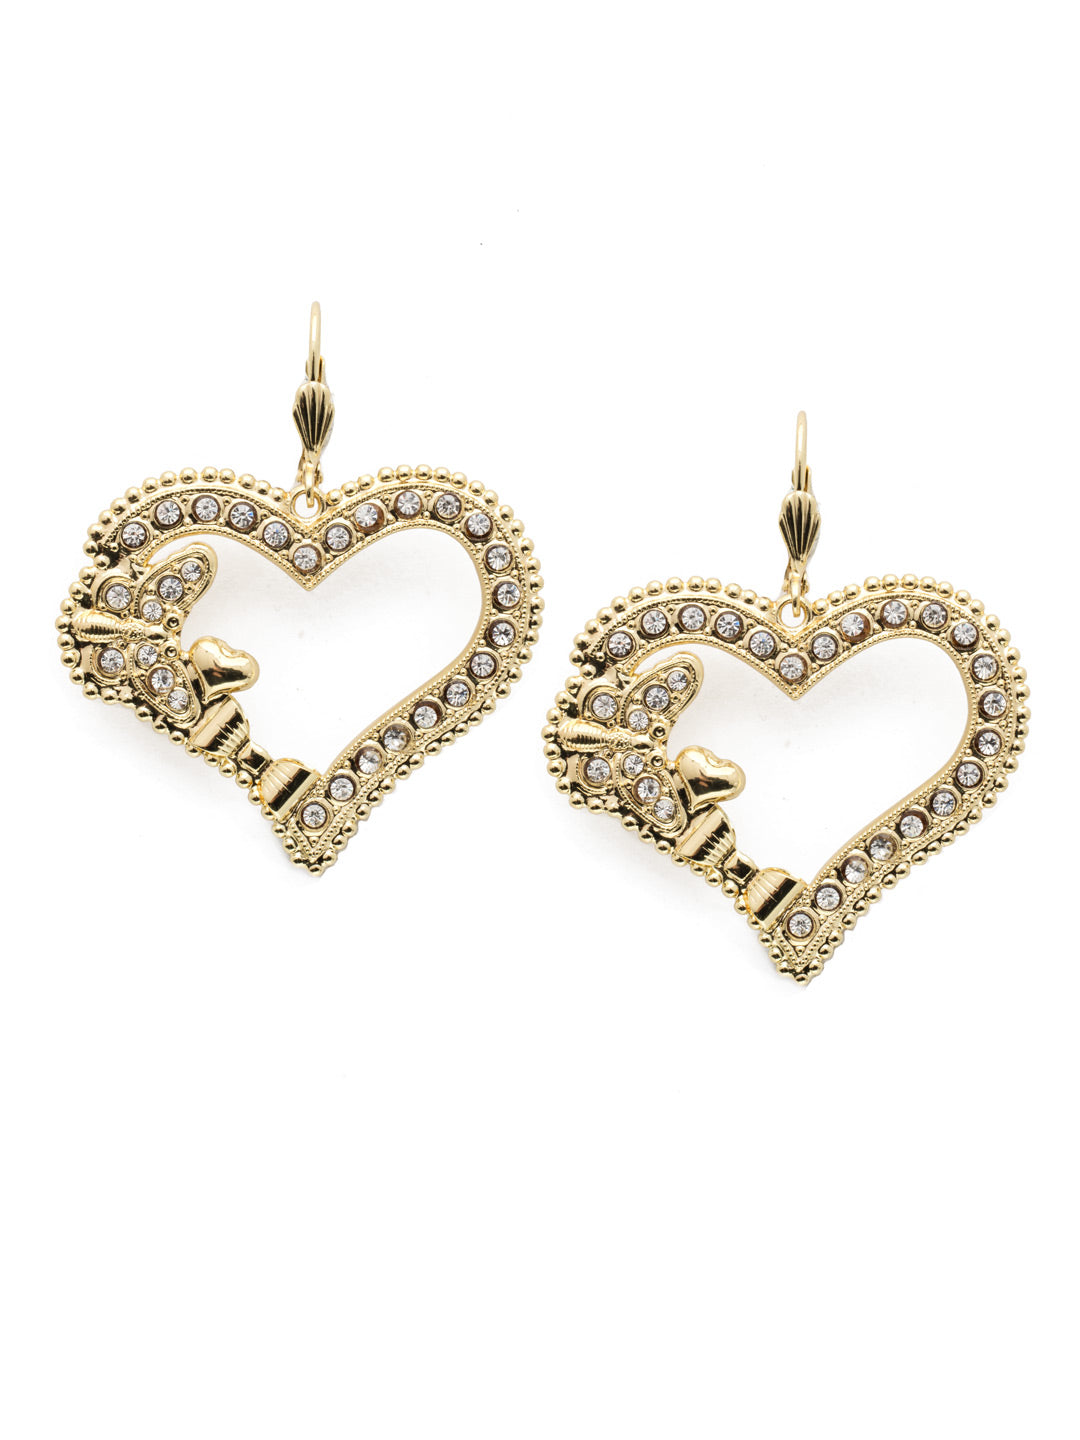 Suzette French Wire Earring - EEC25BGPLP - Works like a charm! These crystal encrusted heart earrings are full of sparkle and character. With a closer look you'll discover butterfly, bow and heart elements as well.